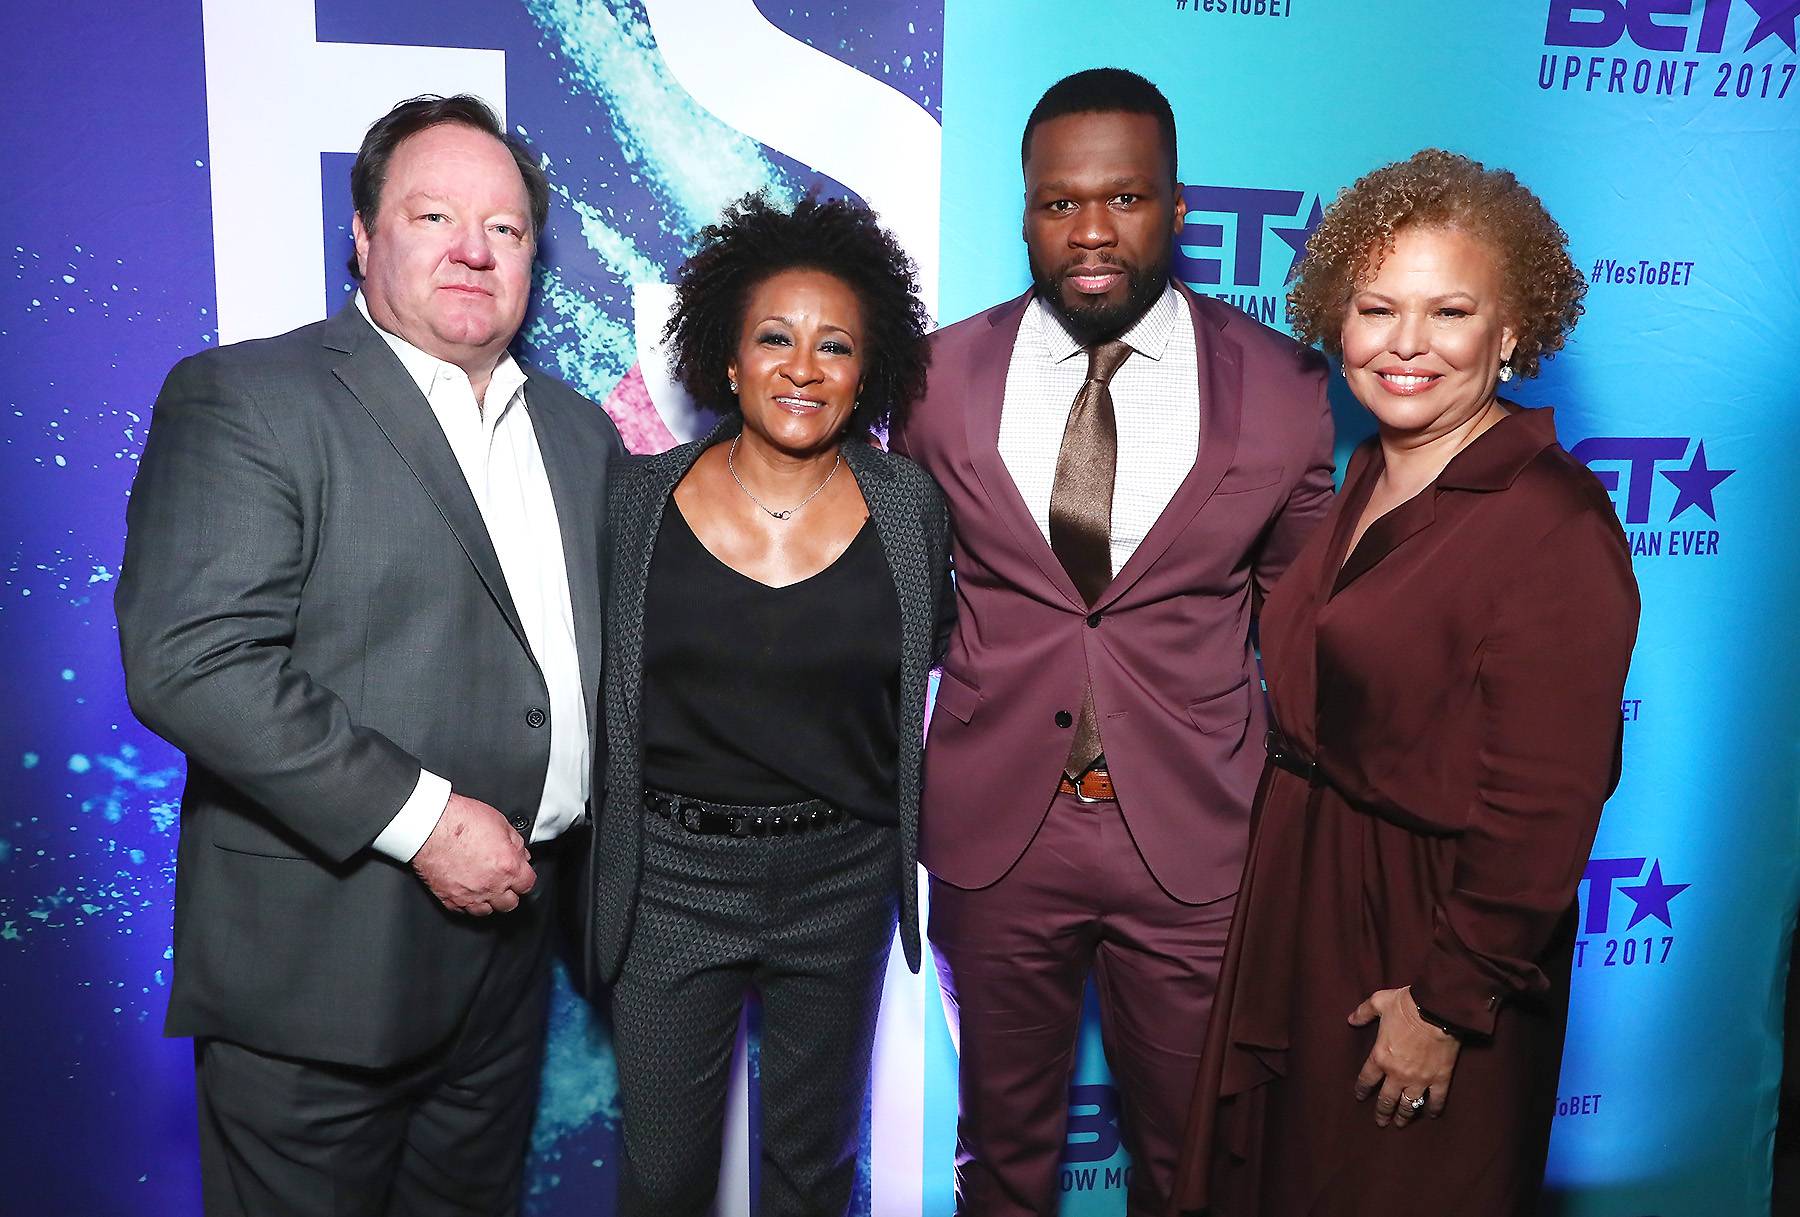 Team Work - Viacom CEO Bob Bakish, comedian Wanda Sykes, rapper 50 Cent and BET CEO Debra L. Lee attend the 2017 BET Upfront NY at PlayStation Theater on April 27, 2017, in New York City. (Photo: Astrid Stawiarz/Getty Images for BET)